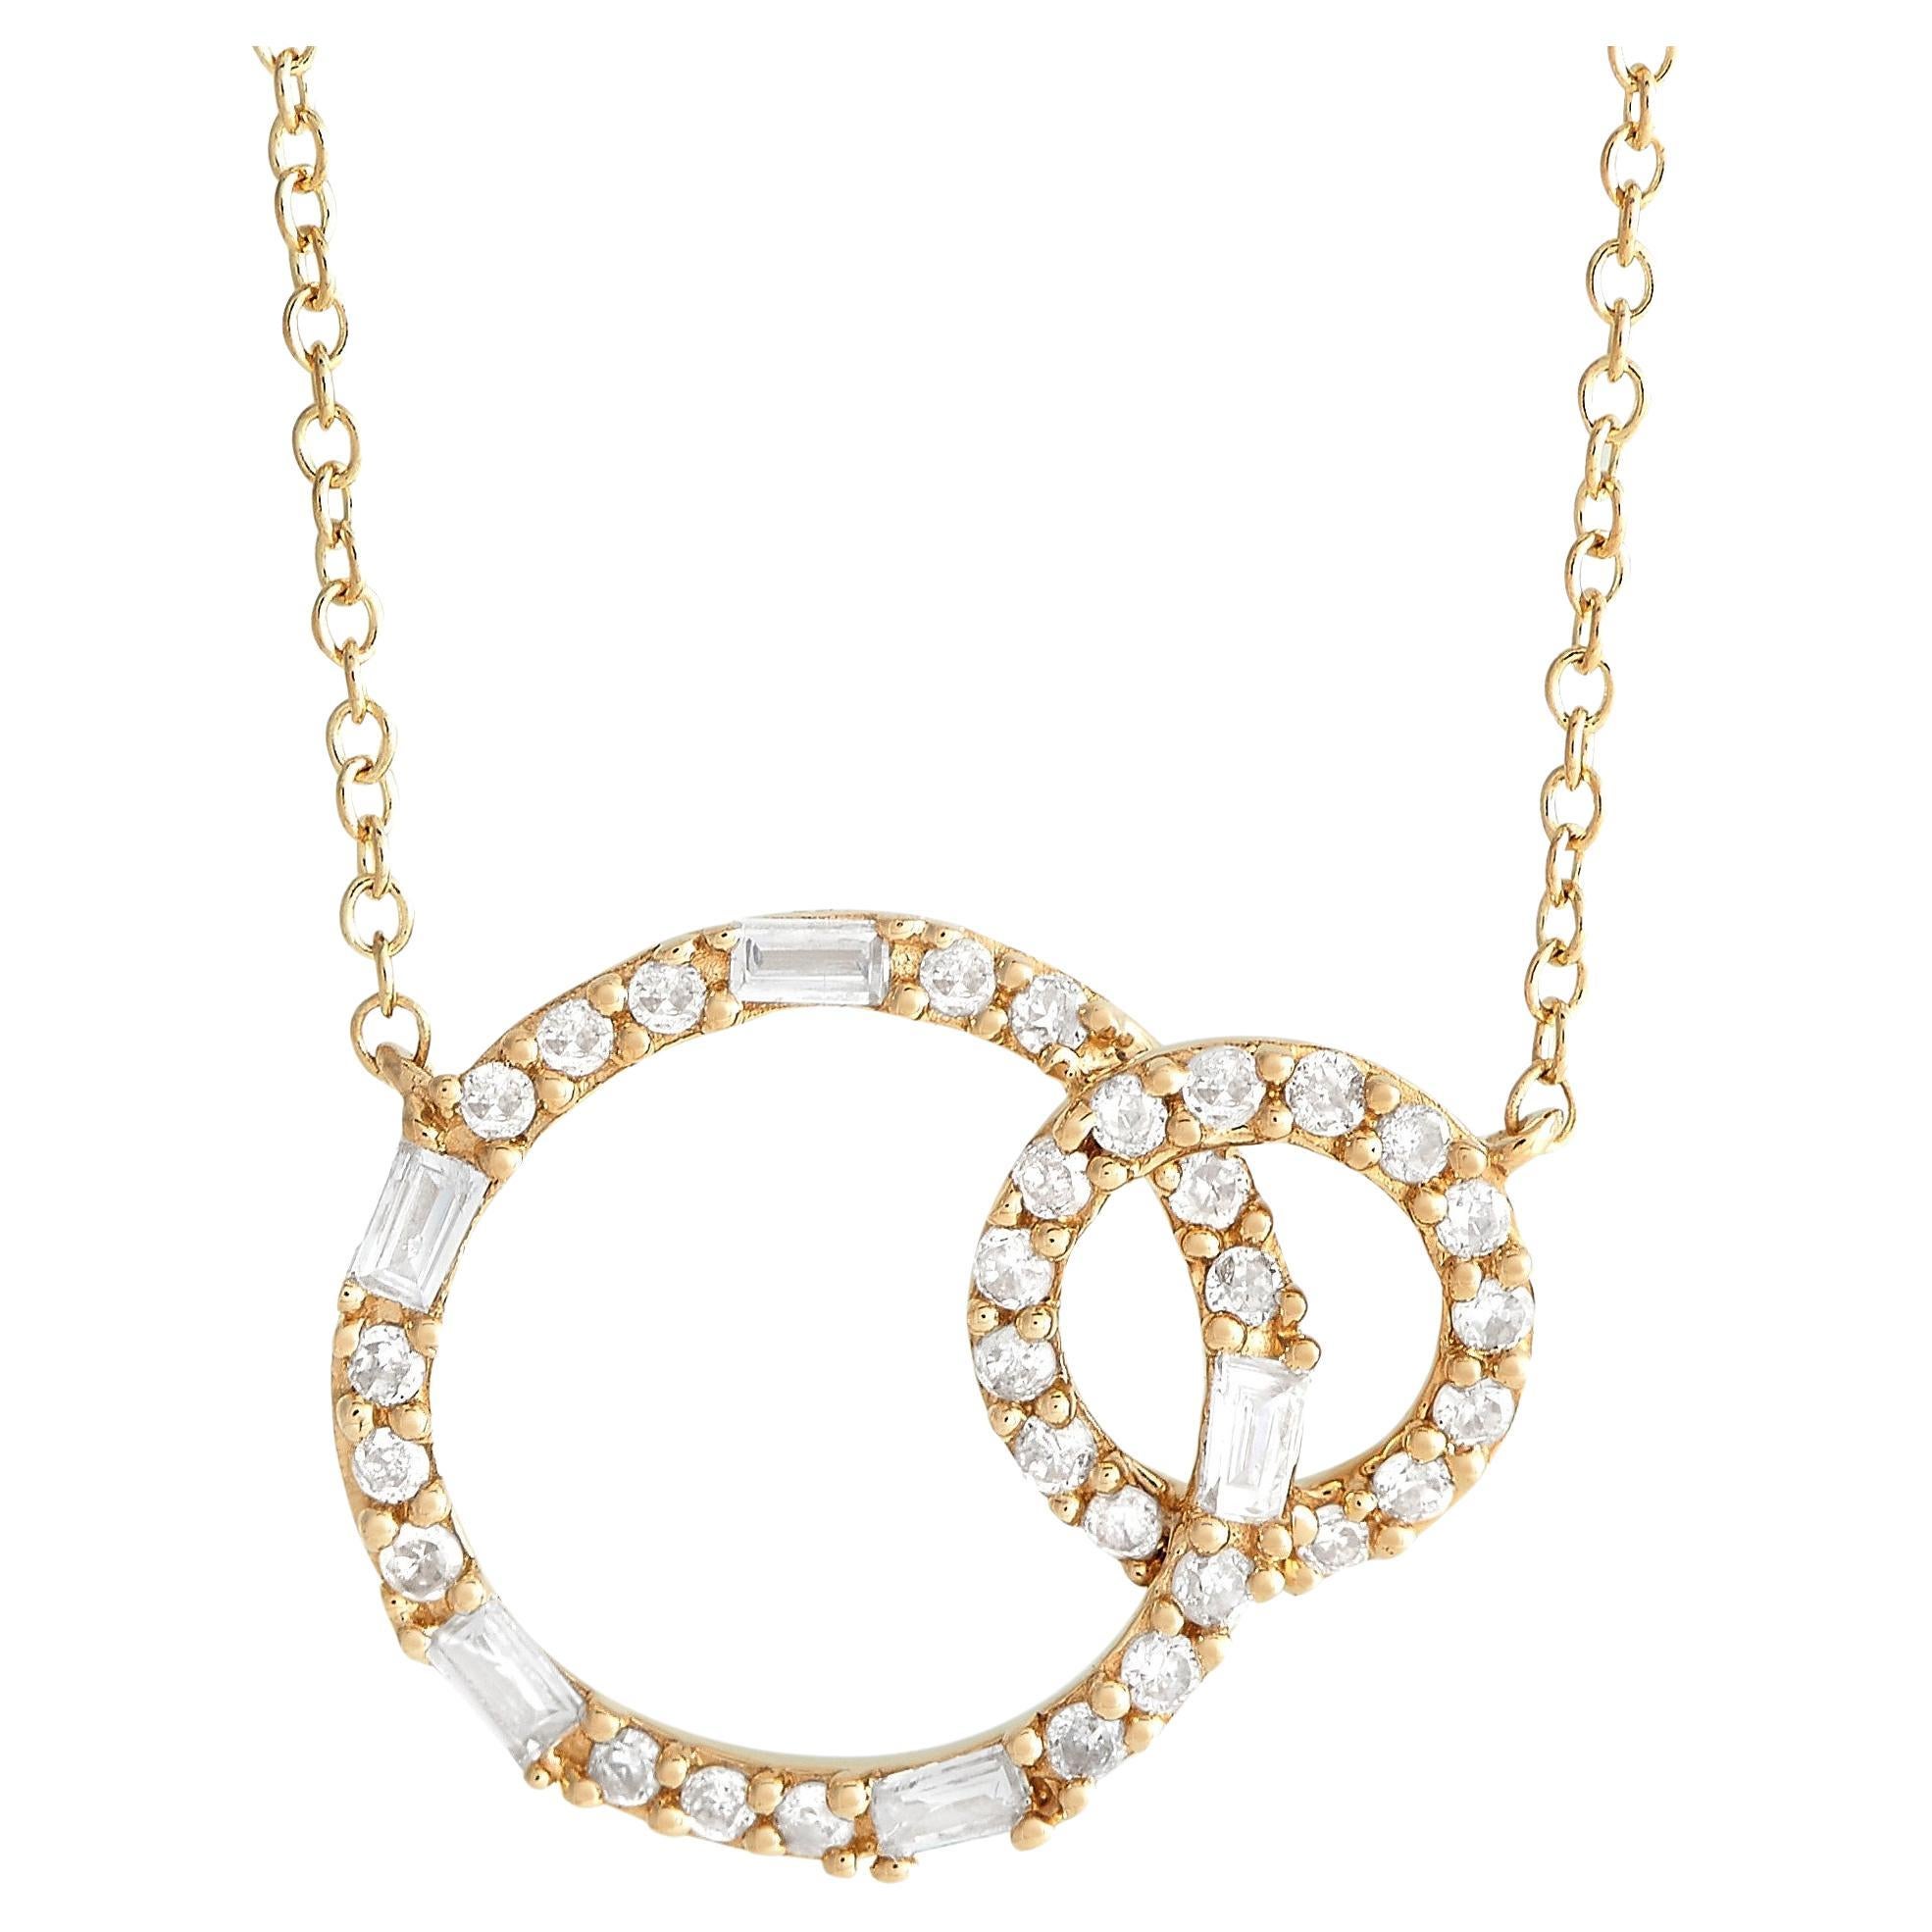 LB Exclusive 14K Yellow Gold 0.25ct Diamond Double Hoop Necklace